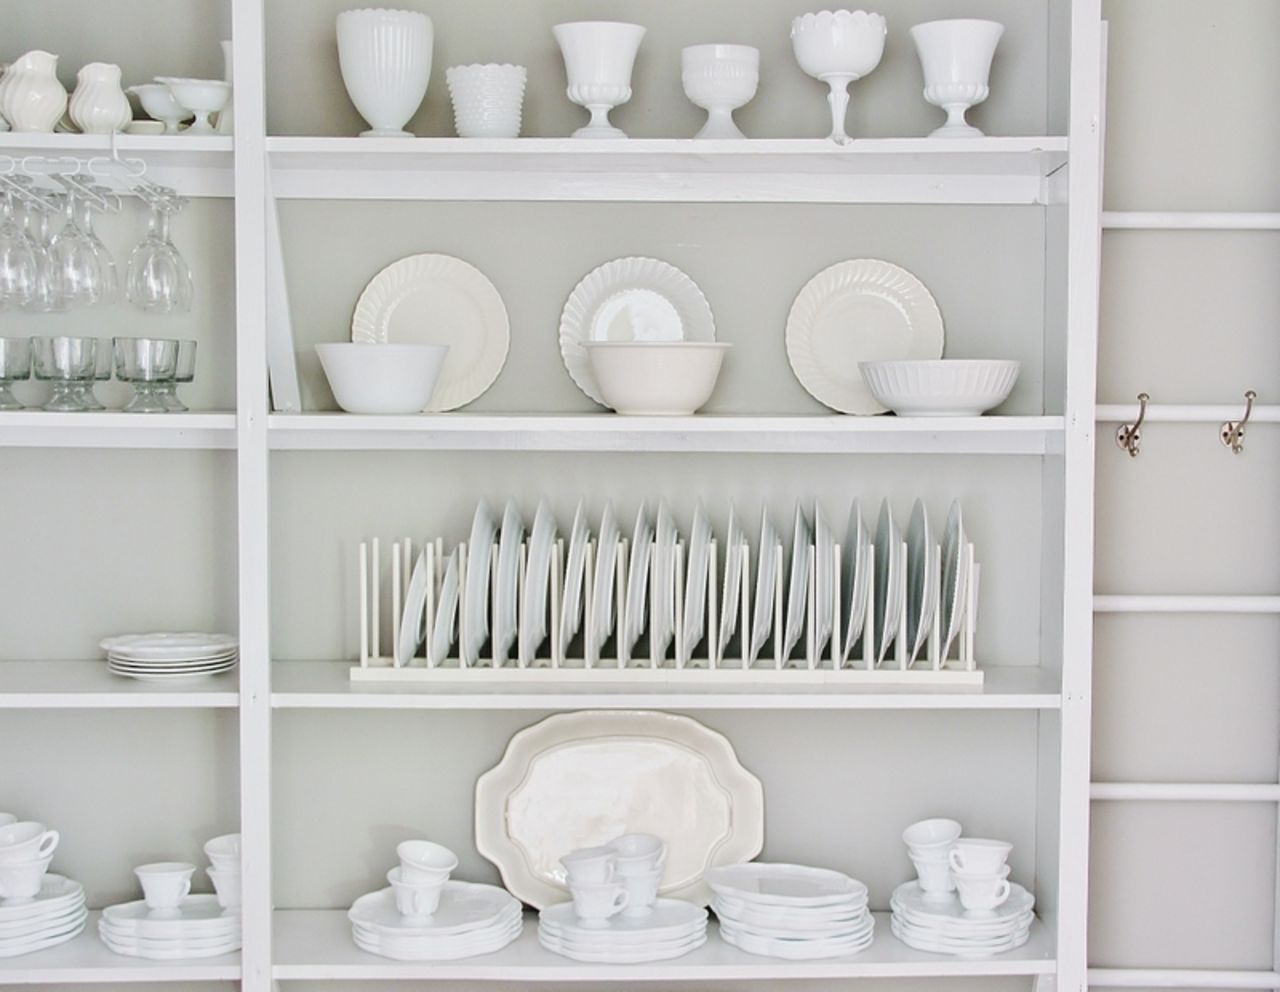 Wood's collection of milk glass fits in perfectly with the rest of her white china.